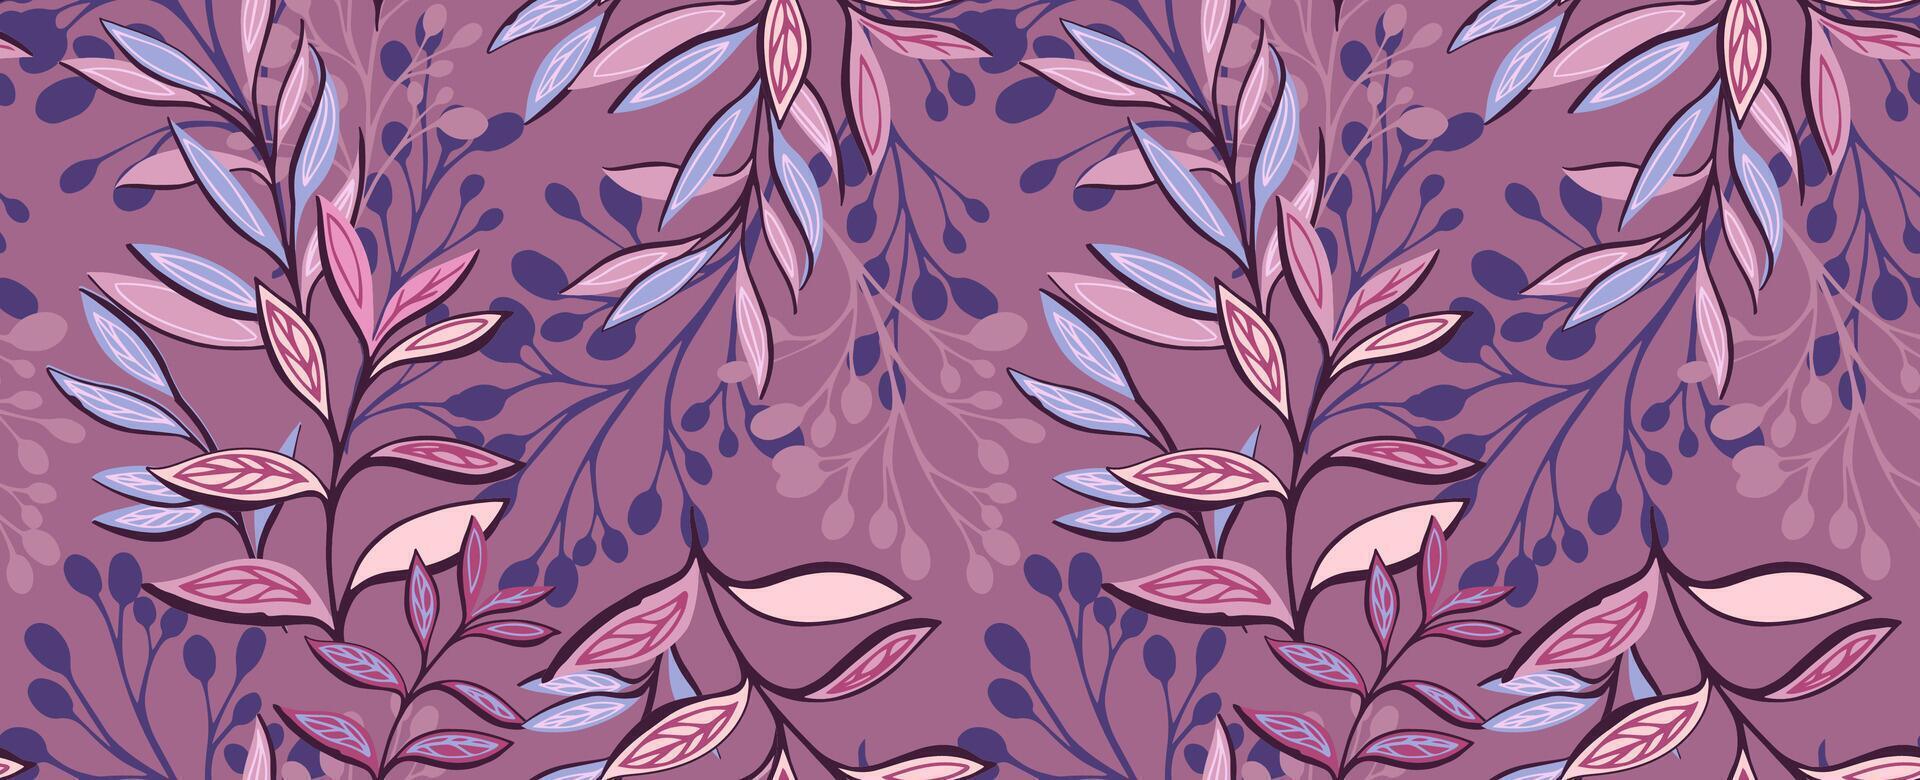 Artistic abstract shapes branches plants with leaves seamless pattern. hand drawn illustration. Creative unique jungle plants printing. Template for design, textile, fabric vector